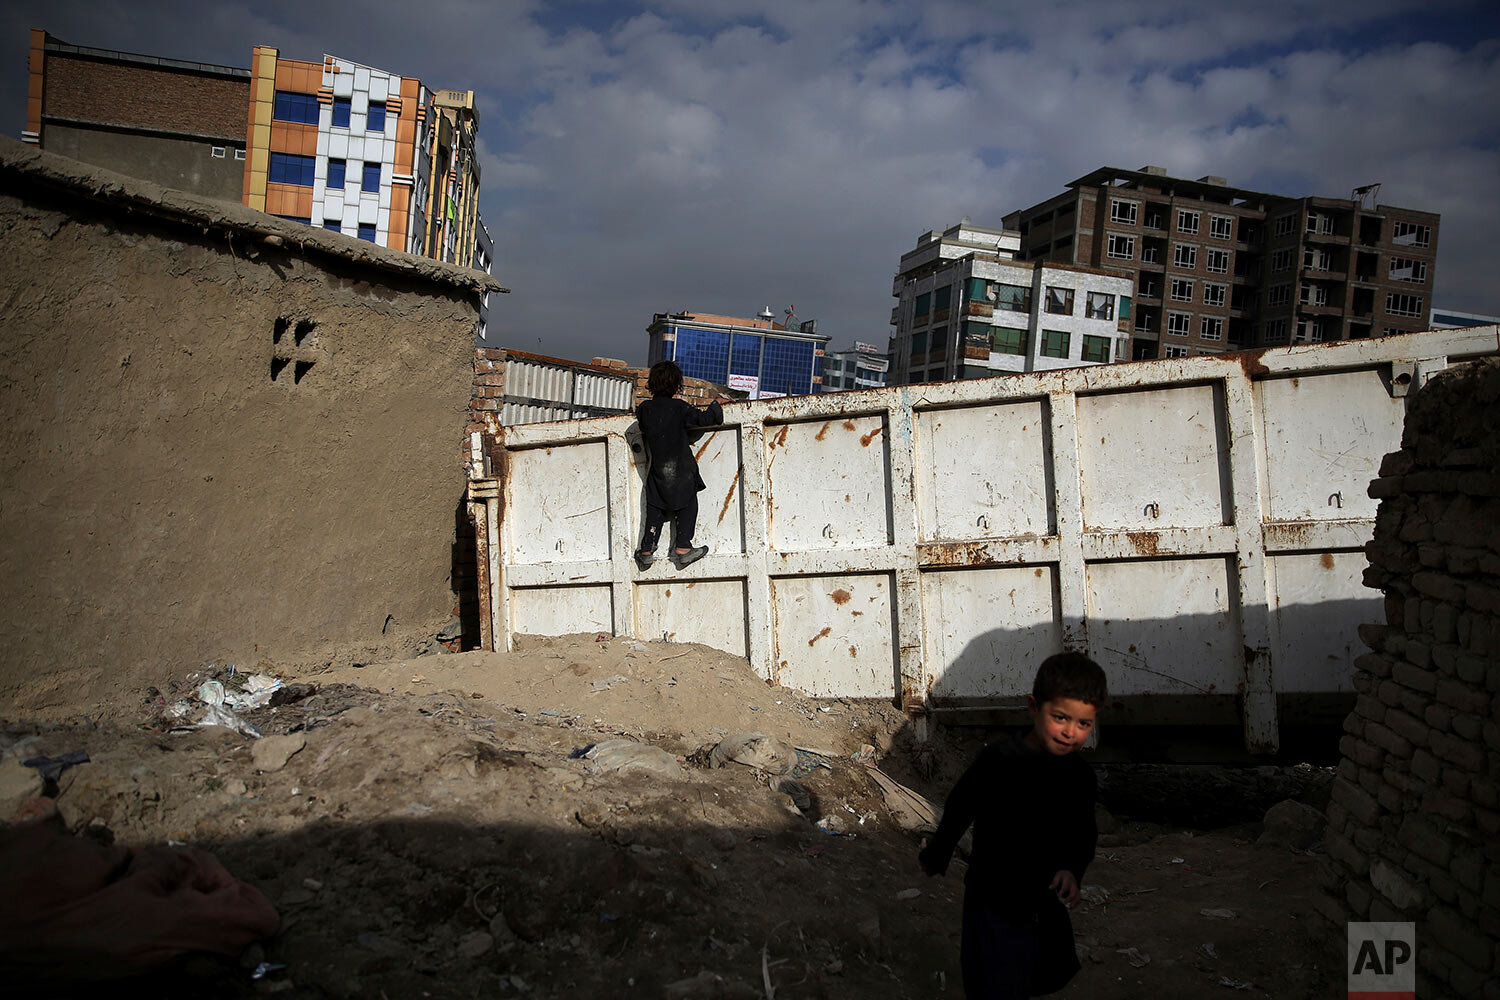  Boys play at a camp for internally displaced people in Kabul, Afghanistan, Monday, Dec. 9, 2019. Tens of thousands of internally displaced Afghans live in camps, which lack basic facilities, across Afghanistan. (AP Photo/Altaf Qadri) 